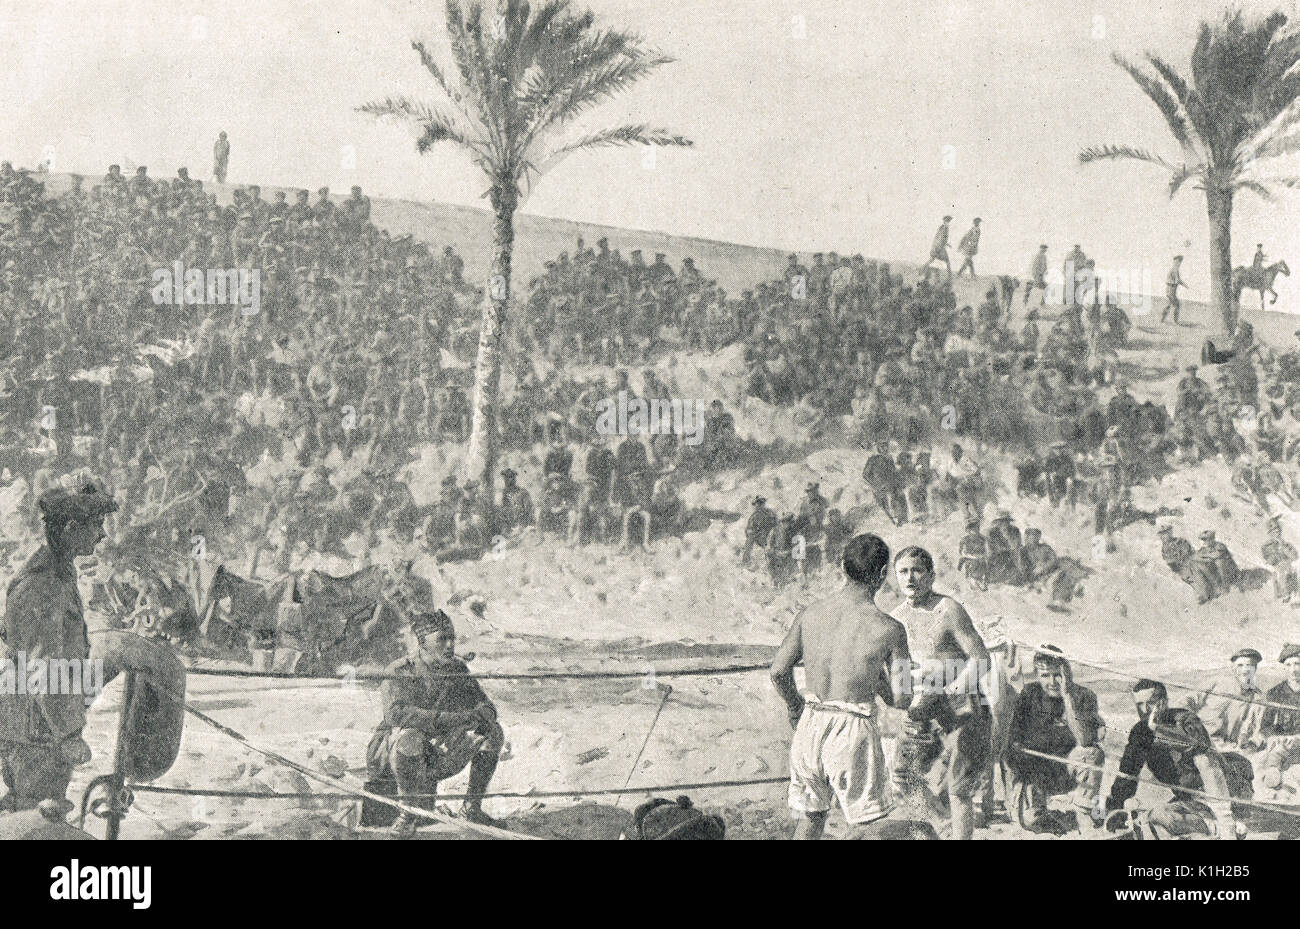 Boxing match, British camp in Egypt, WW1 Stock Photo